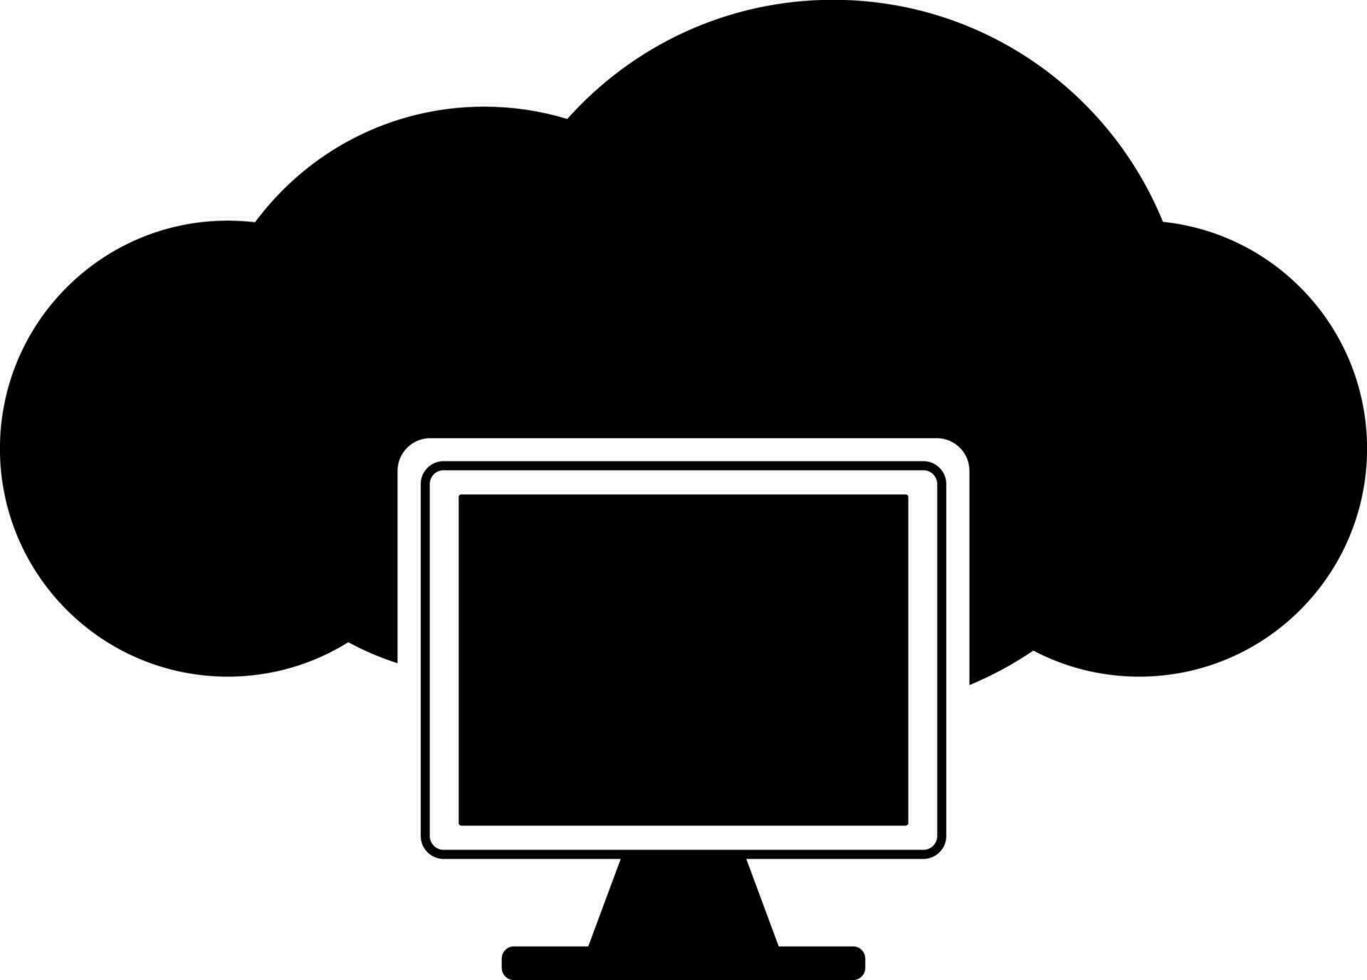 Black cloud and blank computer. vector